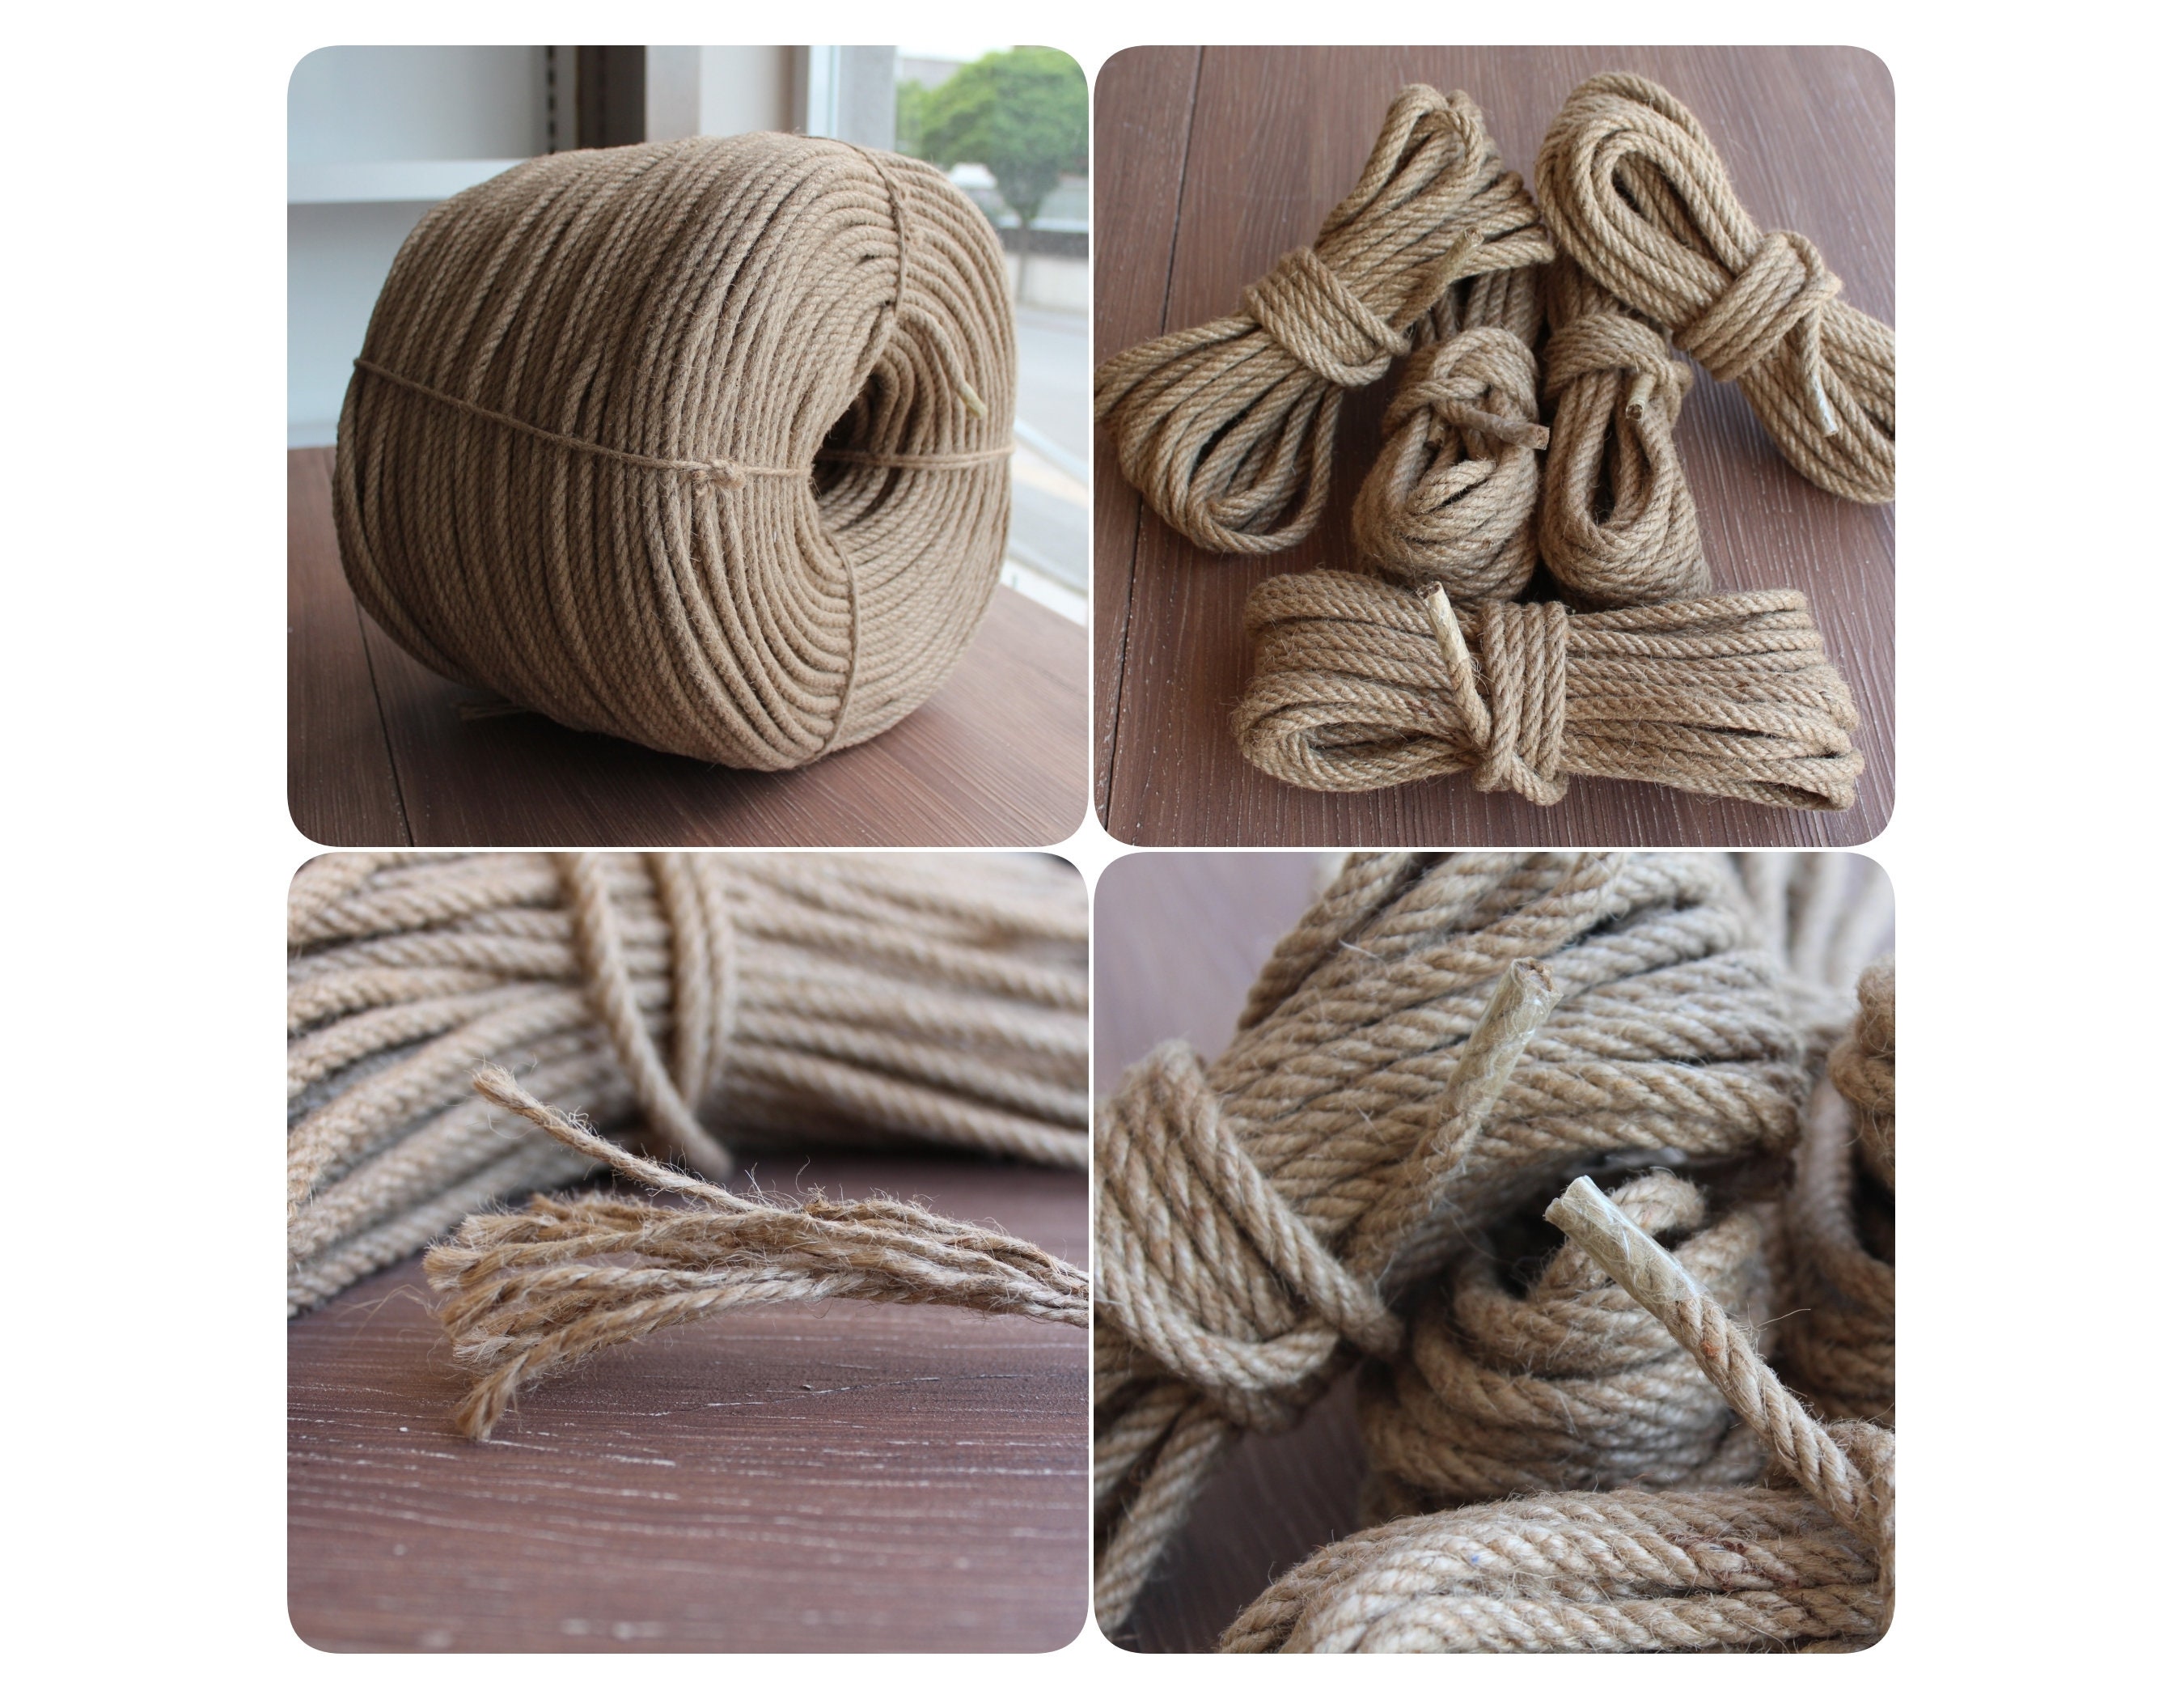 HRX 6mm Jute Rope, Natural Jute Twine String 66 Feet Strong and